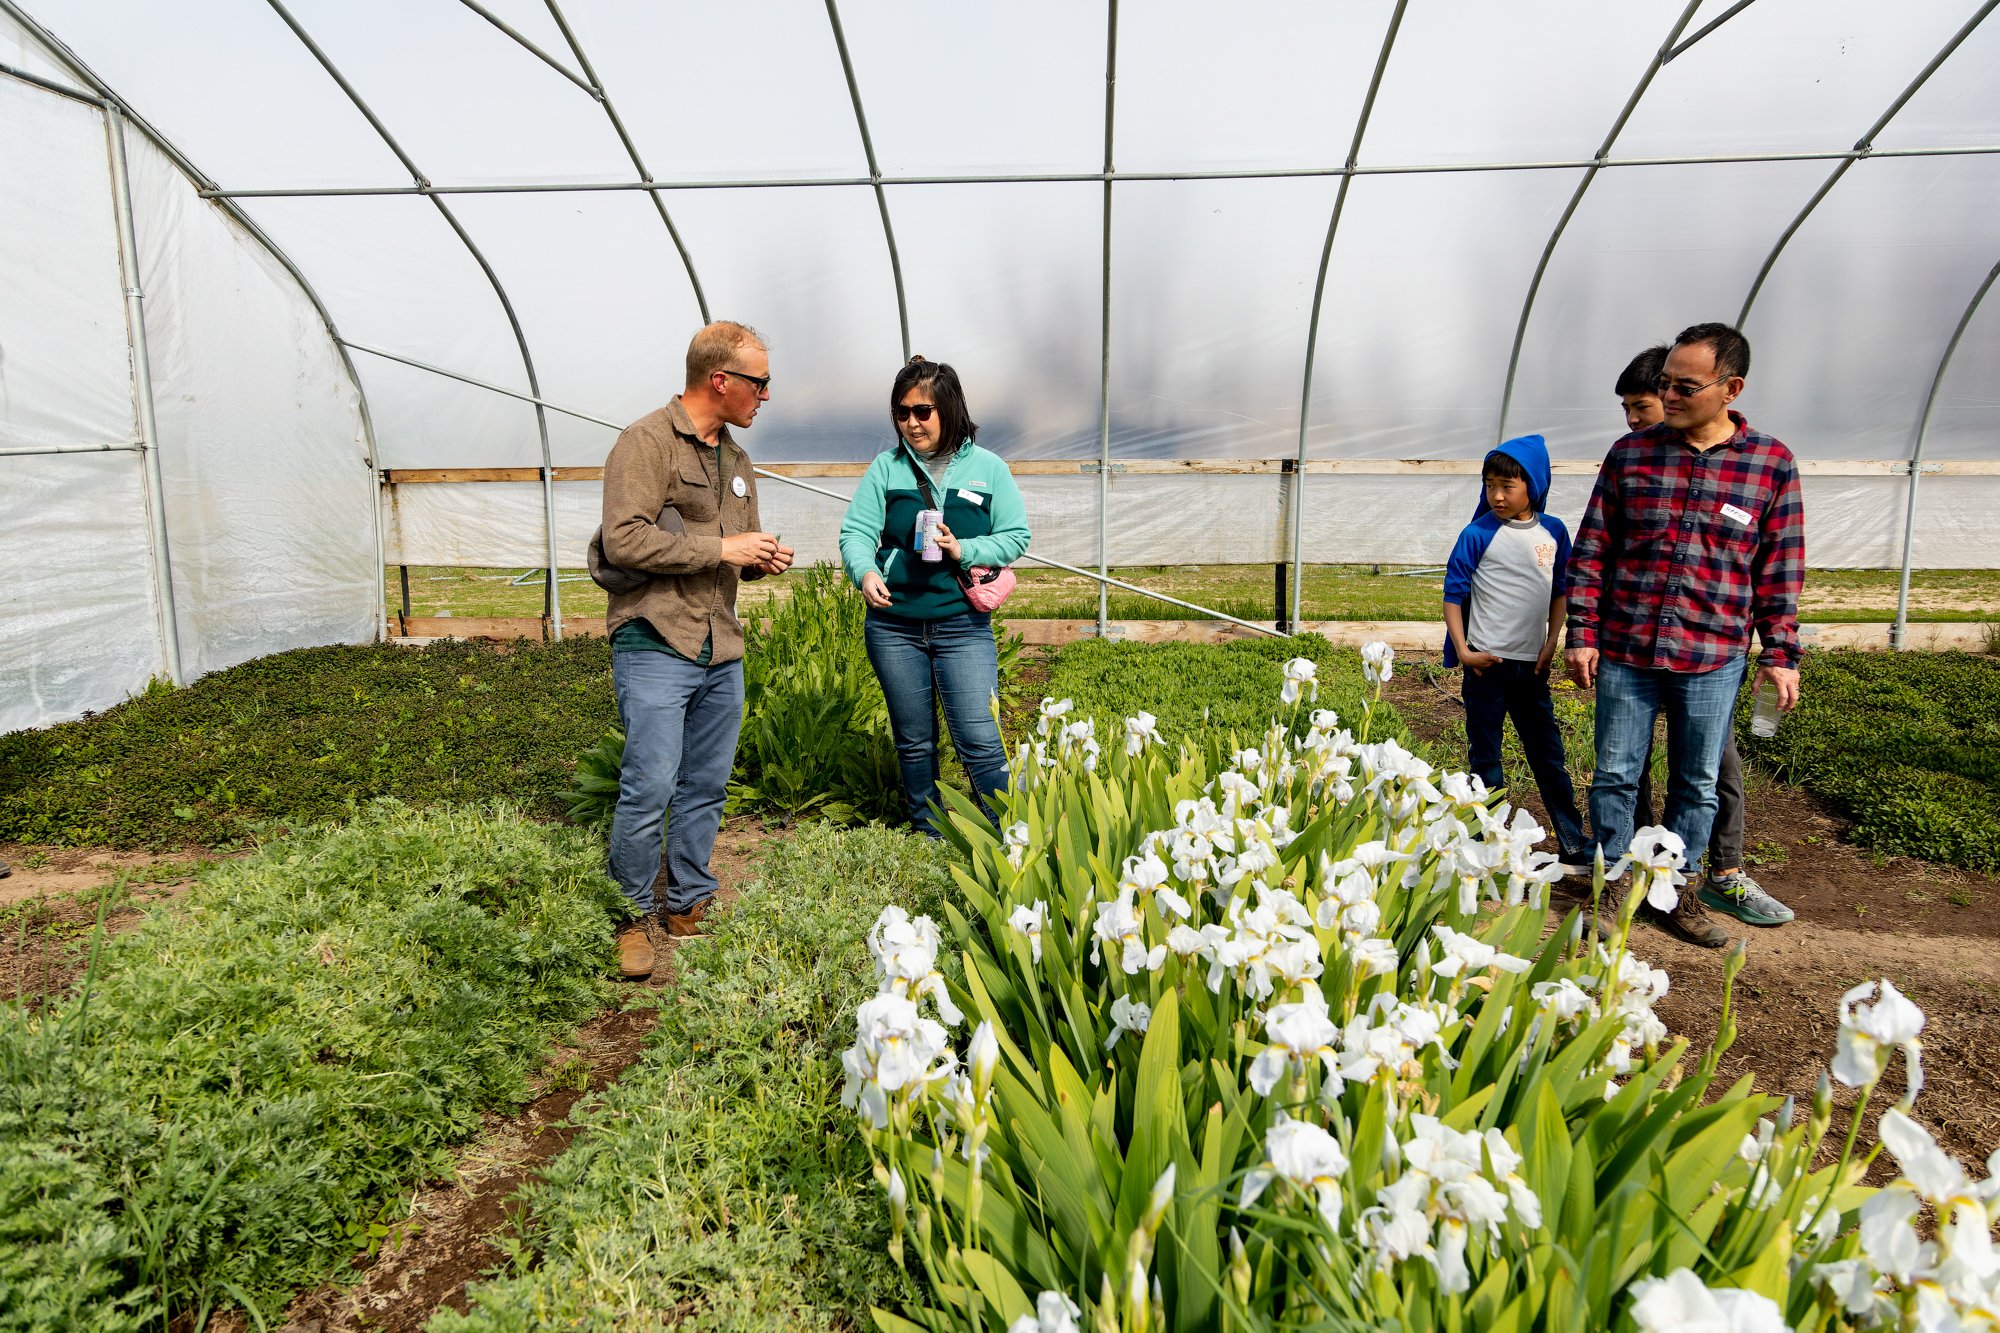 Visitors look at iris growing in the greenhouse.